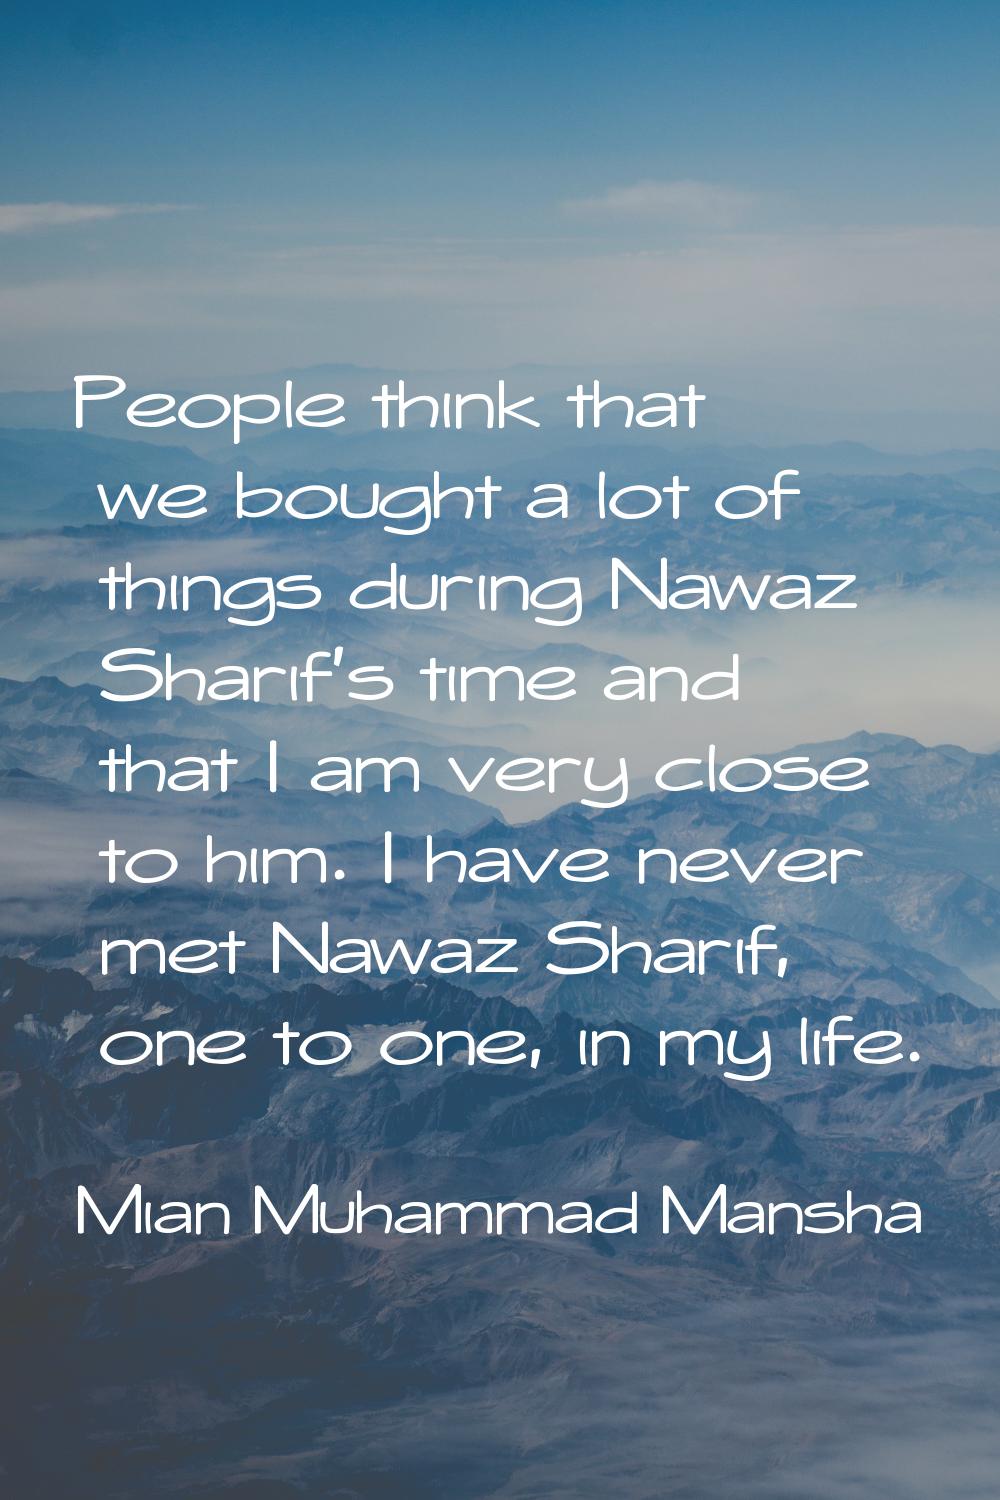 People think that we bought a lot of things during Nawaz Sharif's time and that I am very close to 